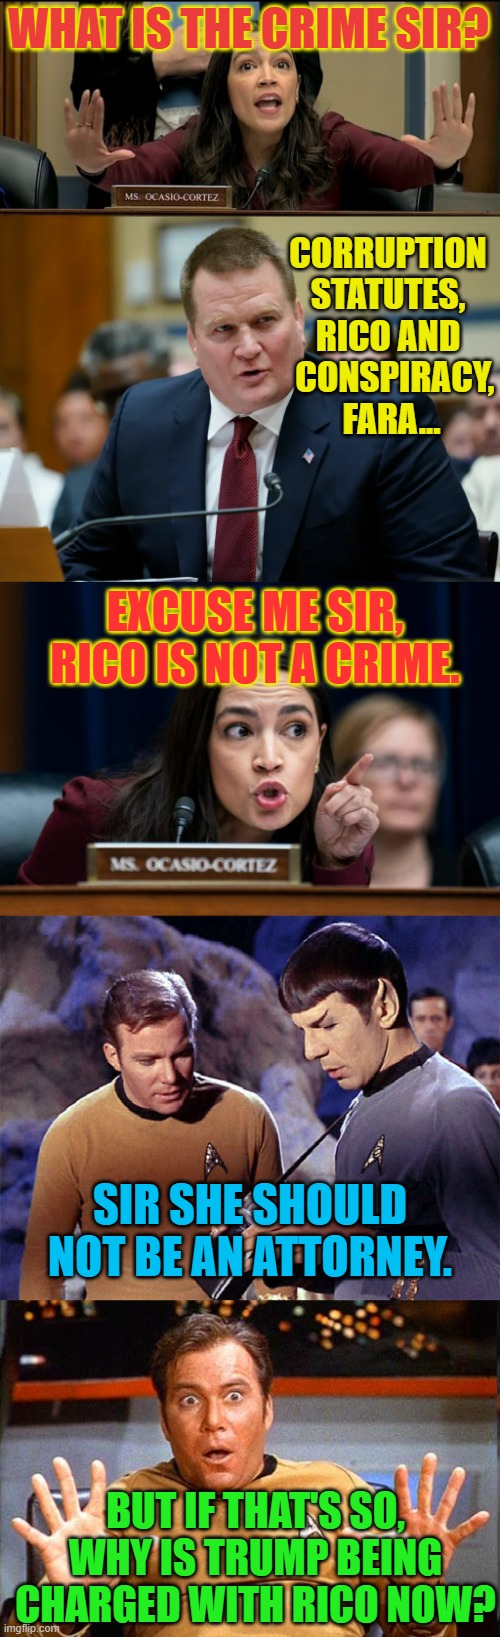 The Drama... | WHAT IS THE CRIME SIR? CORRUPTION STATUTES, RICO AND   CONSPIRACY,  FARA... EXCUSE ME SIR, RICO IS NOT A CRIME. SIR SHE SHOULD NOT BE AN ATTORNEY. BUT IF THAT'S SO, WHY IS TRUMP BEING CHARGED WITH RICO NOW? | image tagged in memes,politics,aoc,joe biden,impeachment,star trek | made w/ Imgflip meme maker